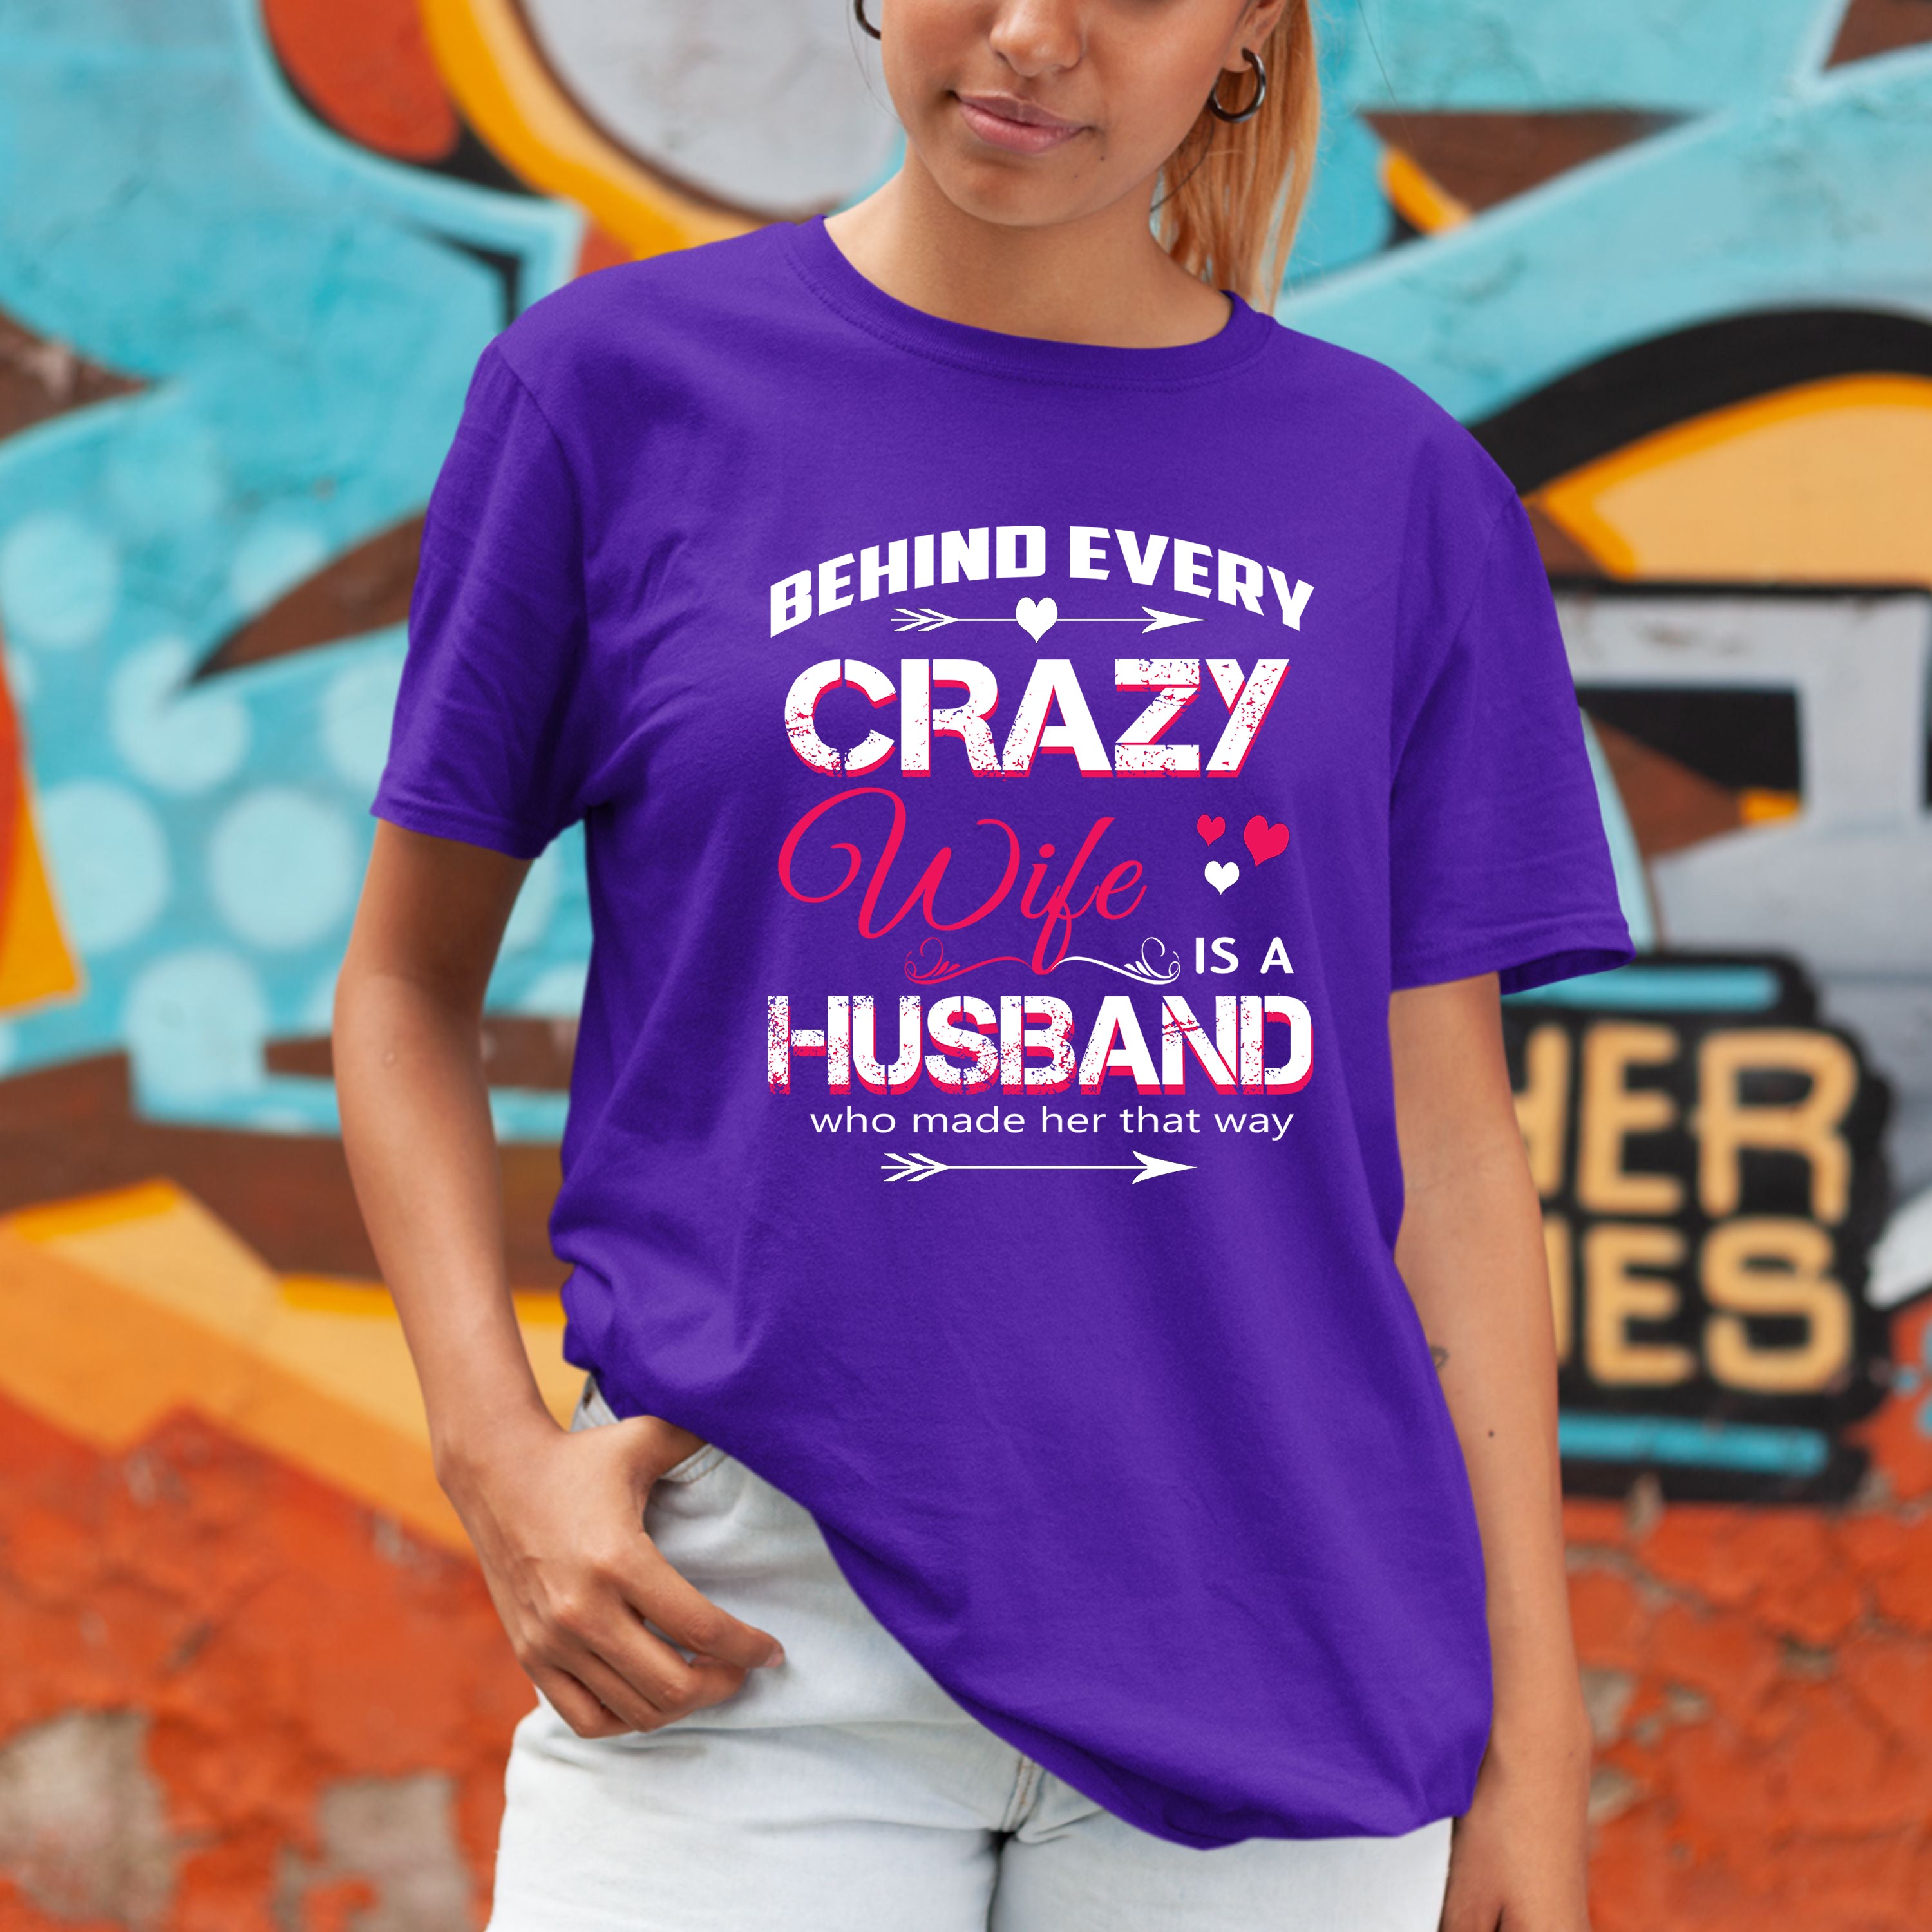 "Behind Every Crazy Wife is a Husband"